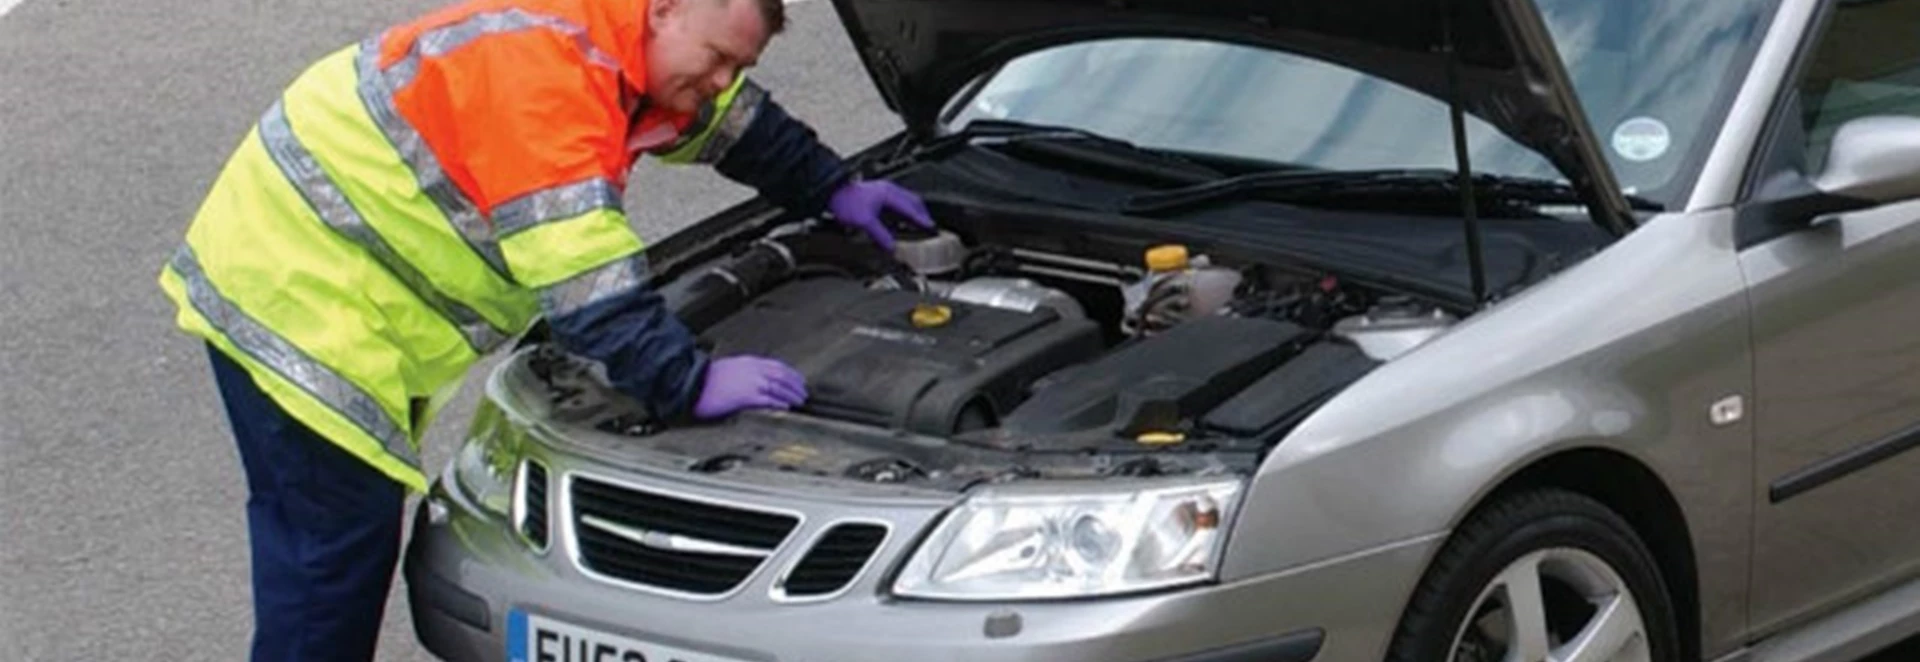 Five things NOT TO DO if your car breaks down 